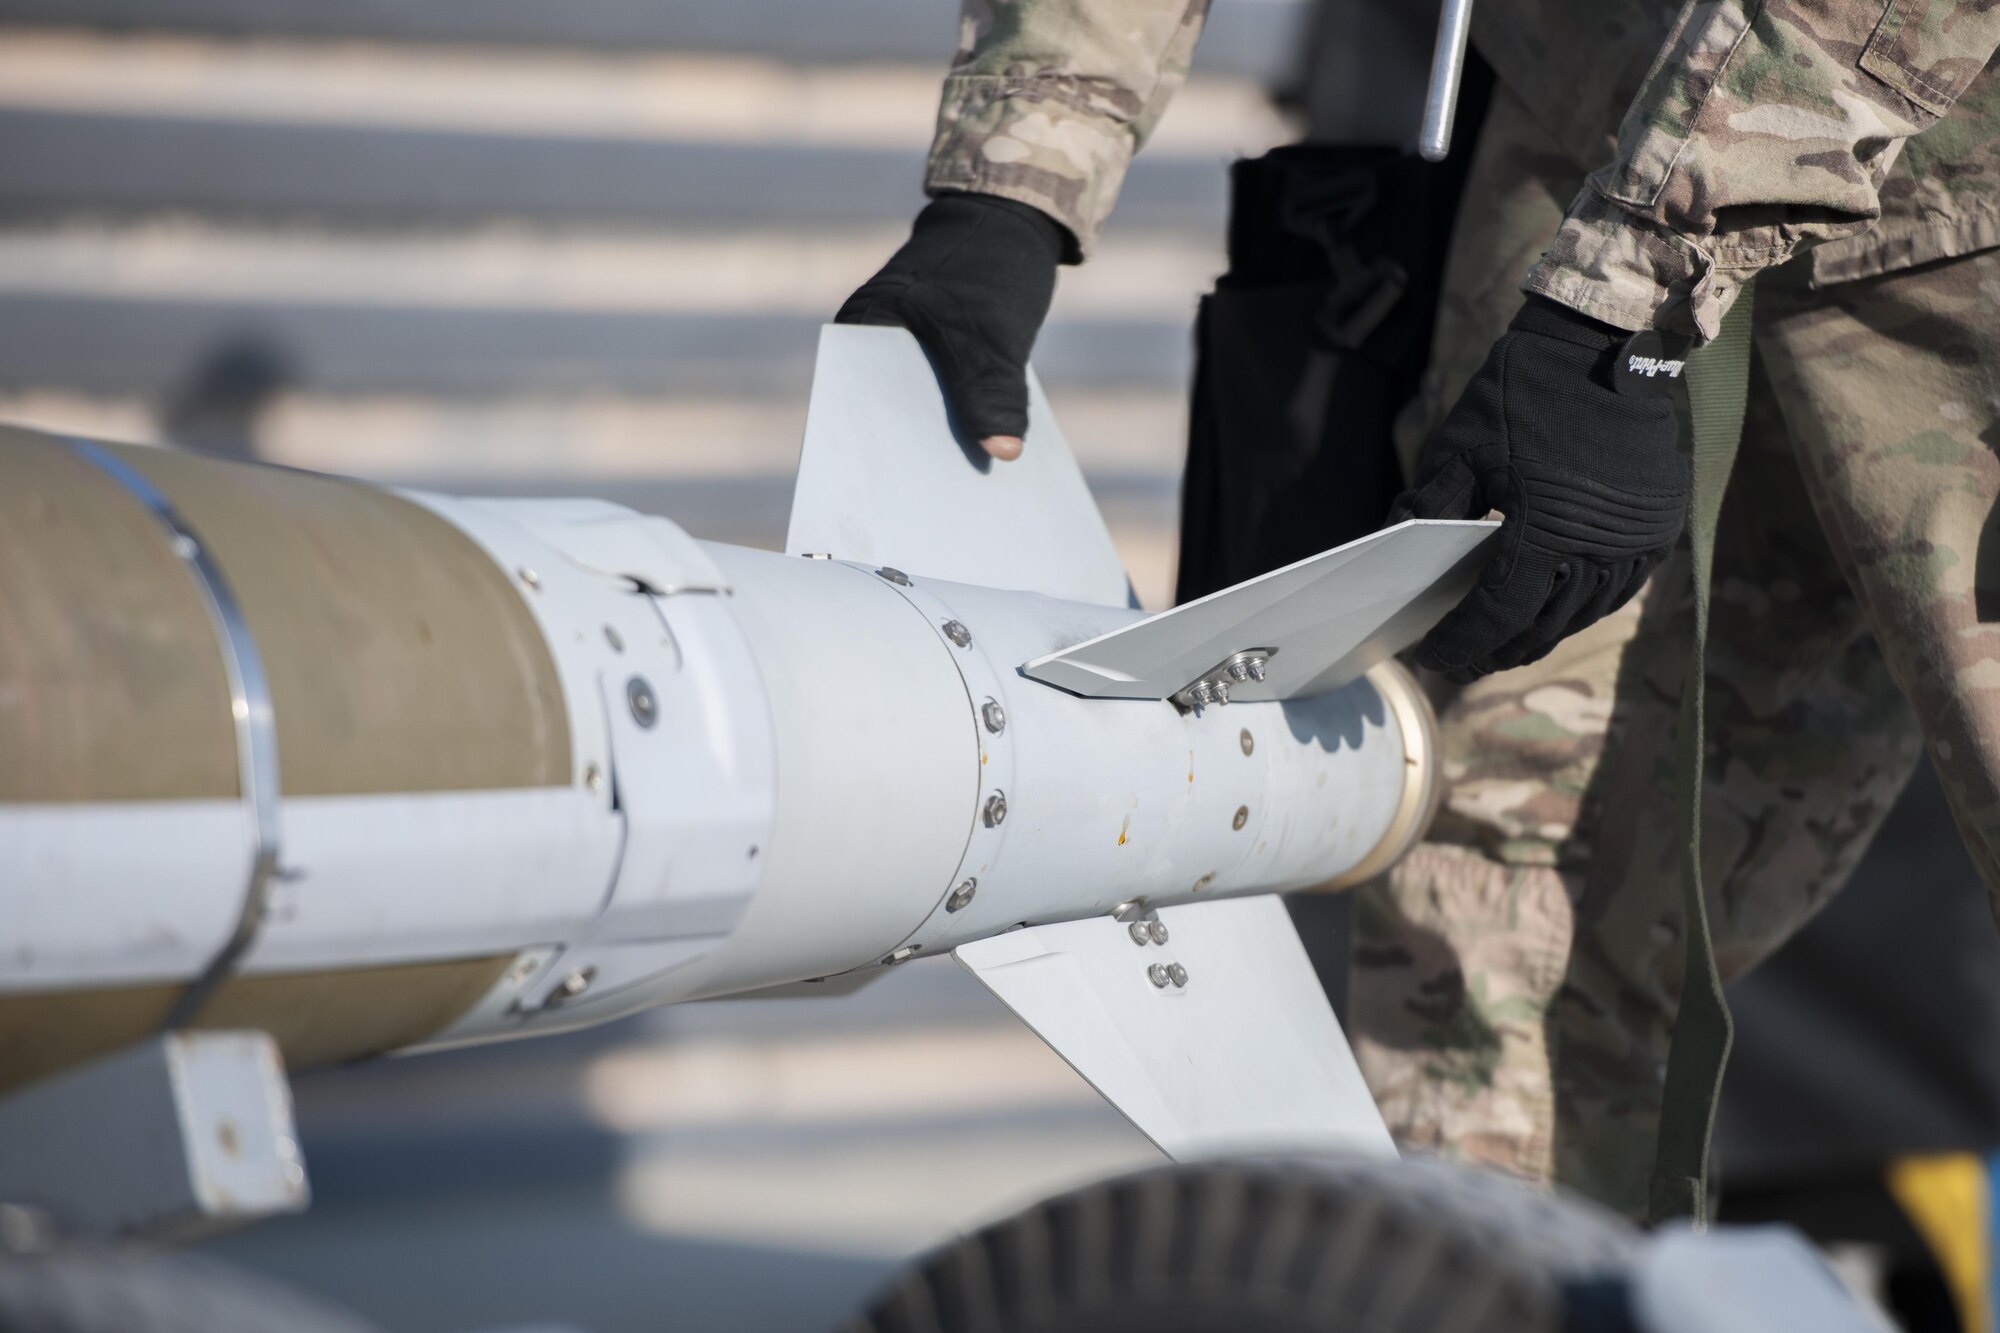 Staff Sgt. Chris White, 455th Expeditionary Aircraft Maintenance Squadron weapons load crew chief, moves a GBU-54 to a bomb stand after downloading it from an F-16 Fighting Falcon at Bagram Airfield, Afghanistan, Jan. 15, 2016. The weapons team performs a critical role for the close air support mission, ensuring Fighting Falcon pilots have the correct and functional munitions to provide the air cover ground forces need. (U.S. Air Force photo/Tech. Sgt. Robert Cloys)